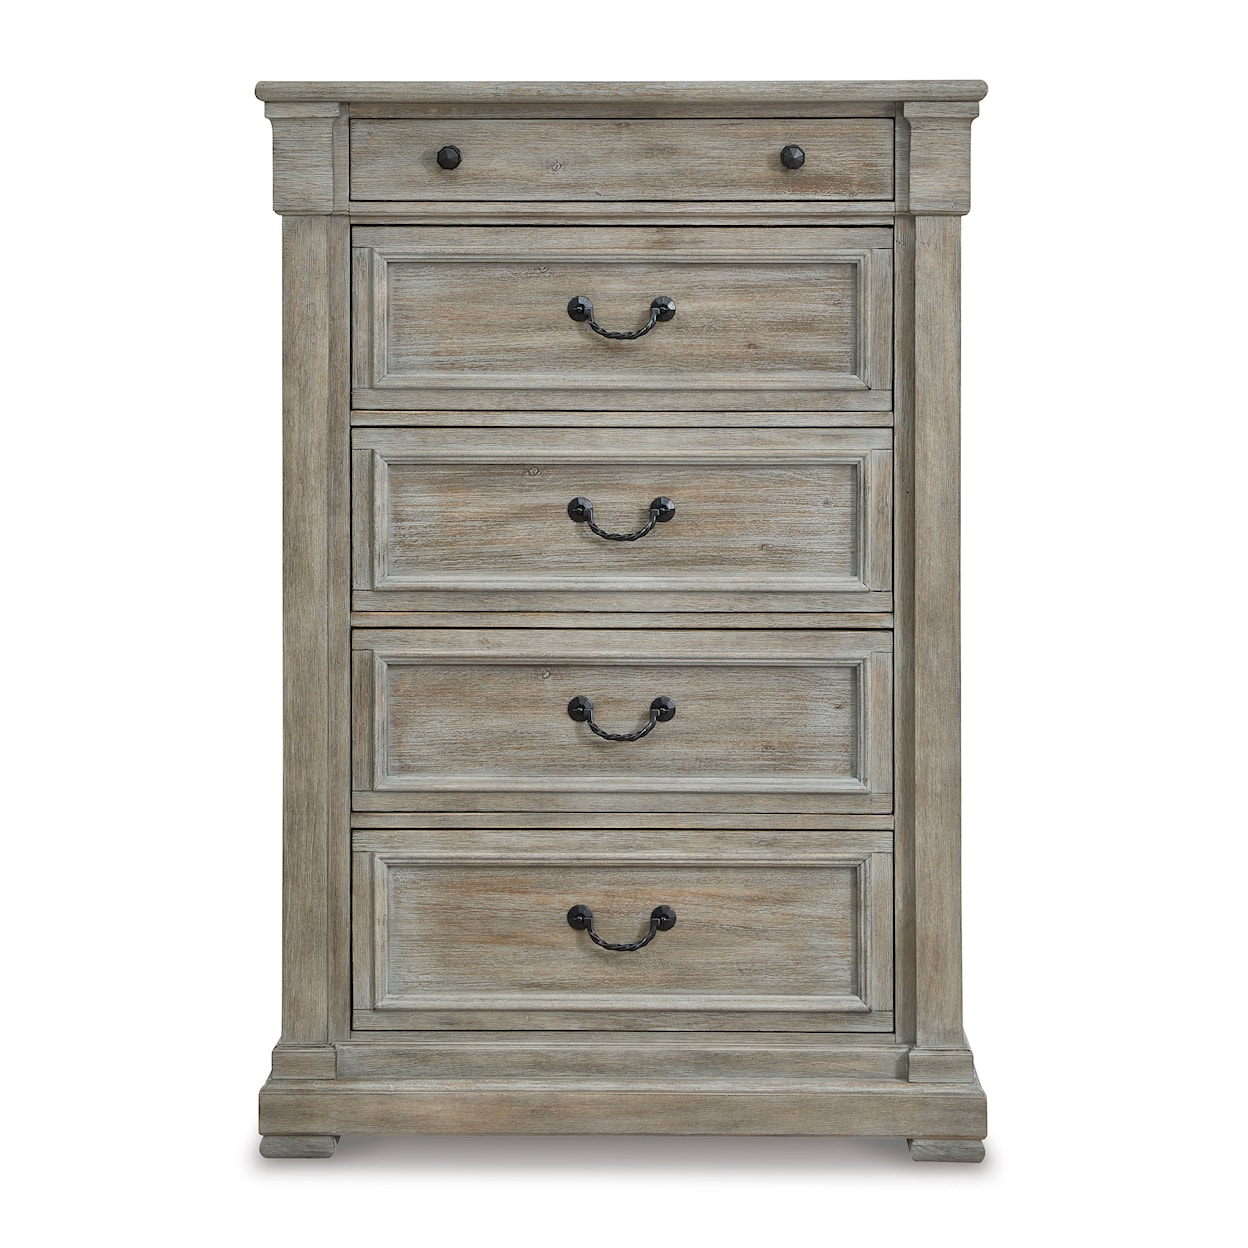 Signature Moreshire Chest of Drawers